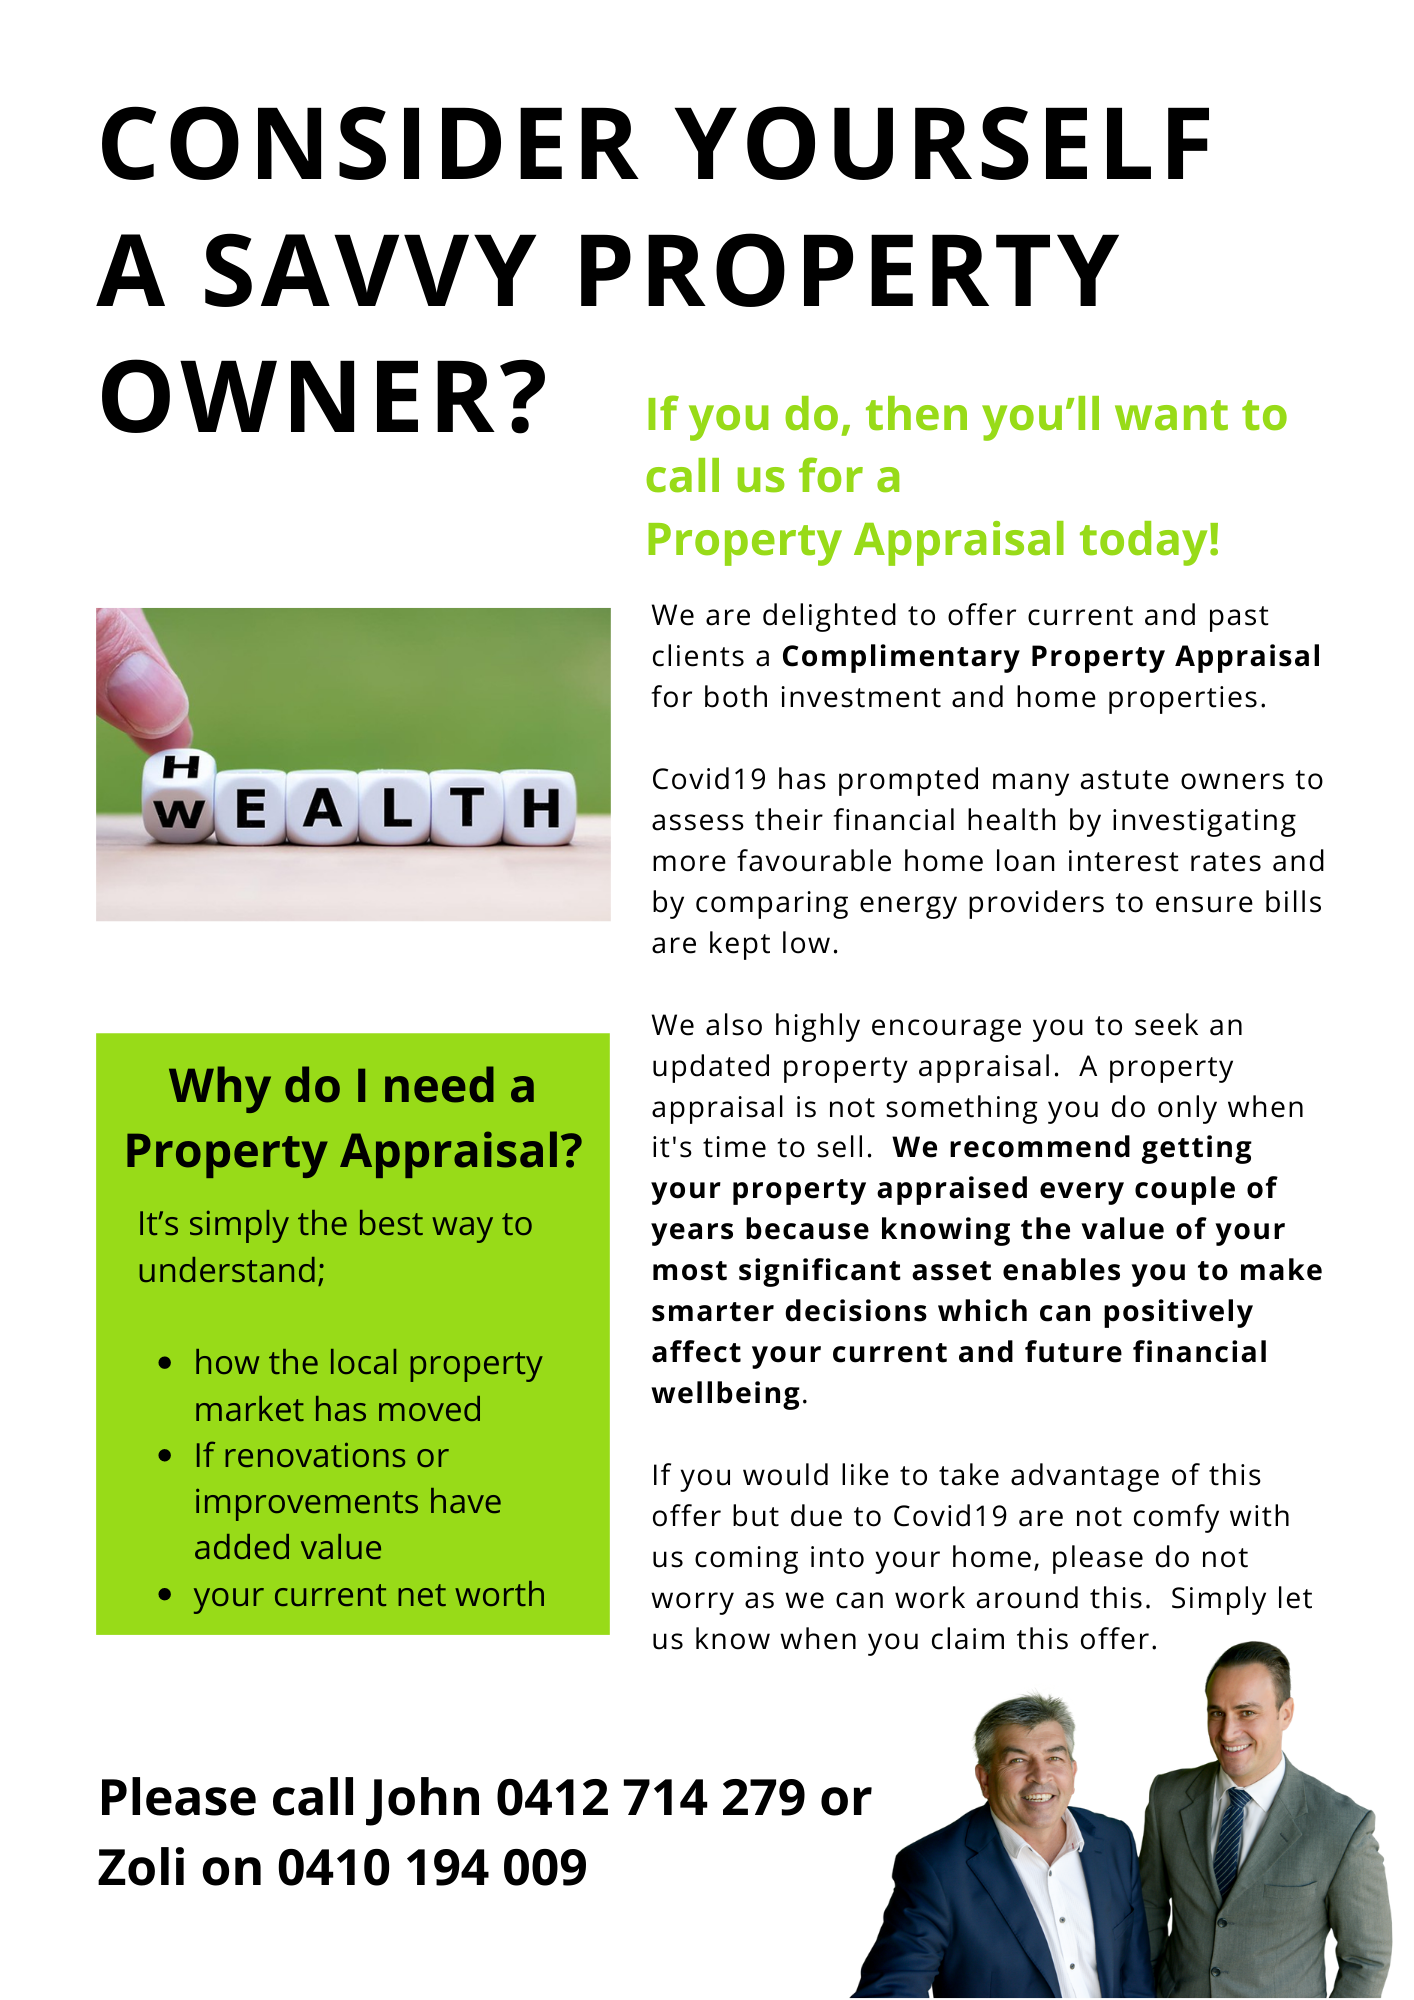 Time for a Property Appraisal?